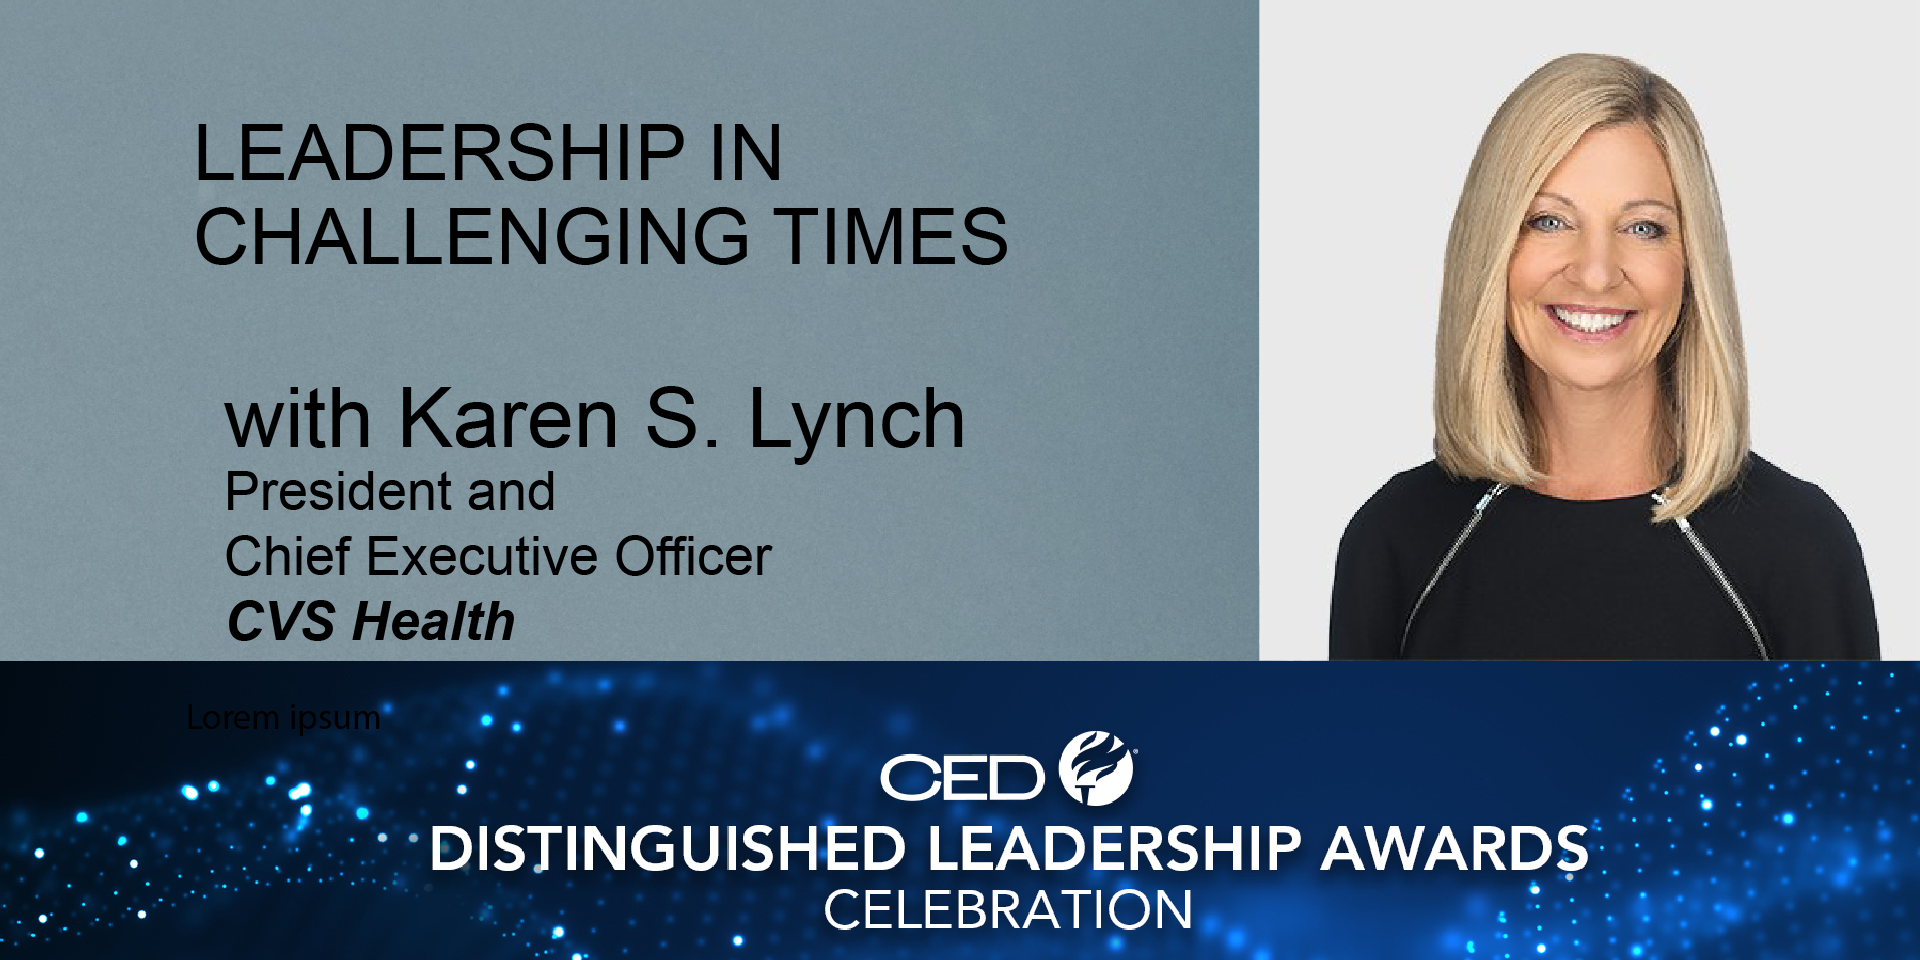 Leadership in Challenging Times with Karen S. Lynch